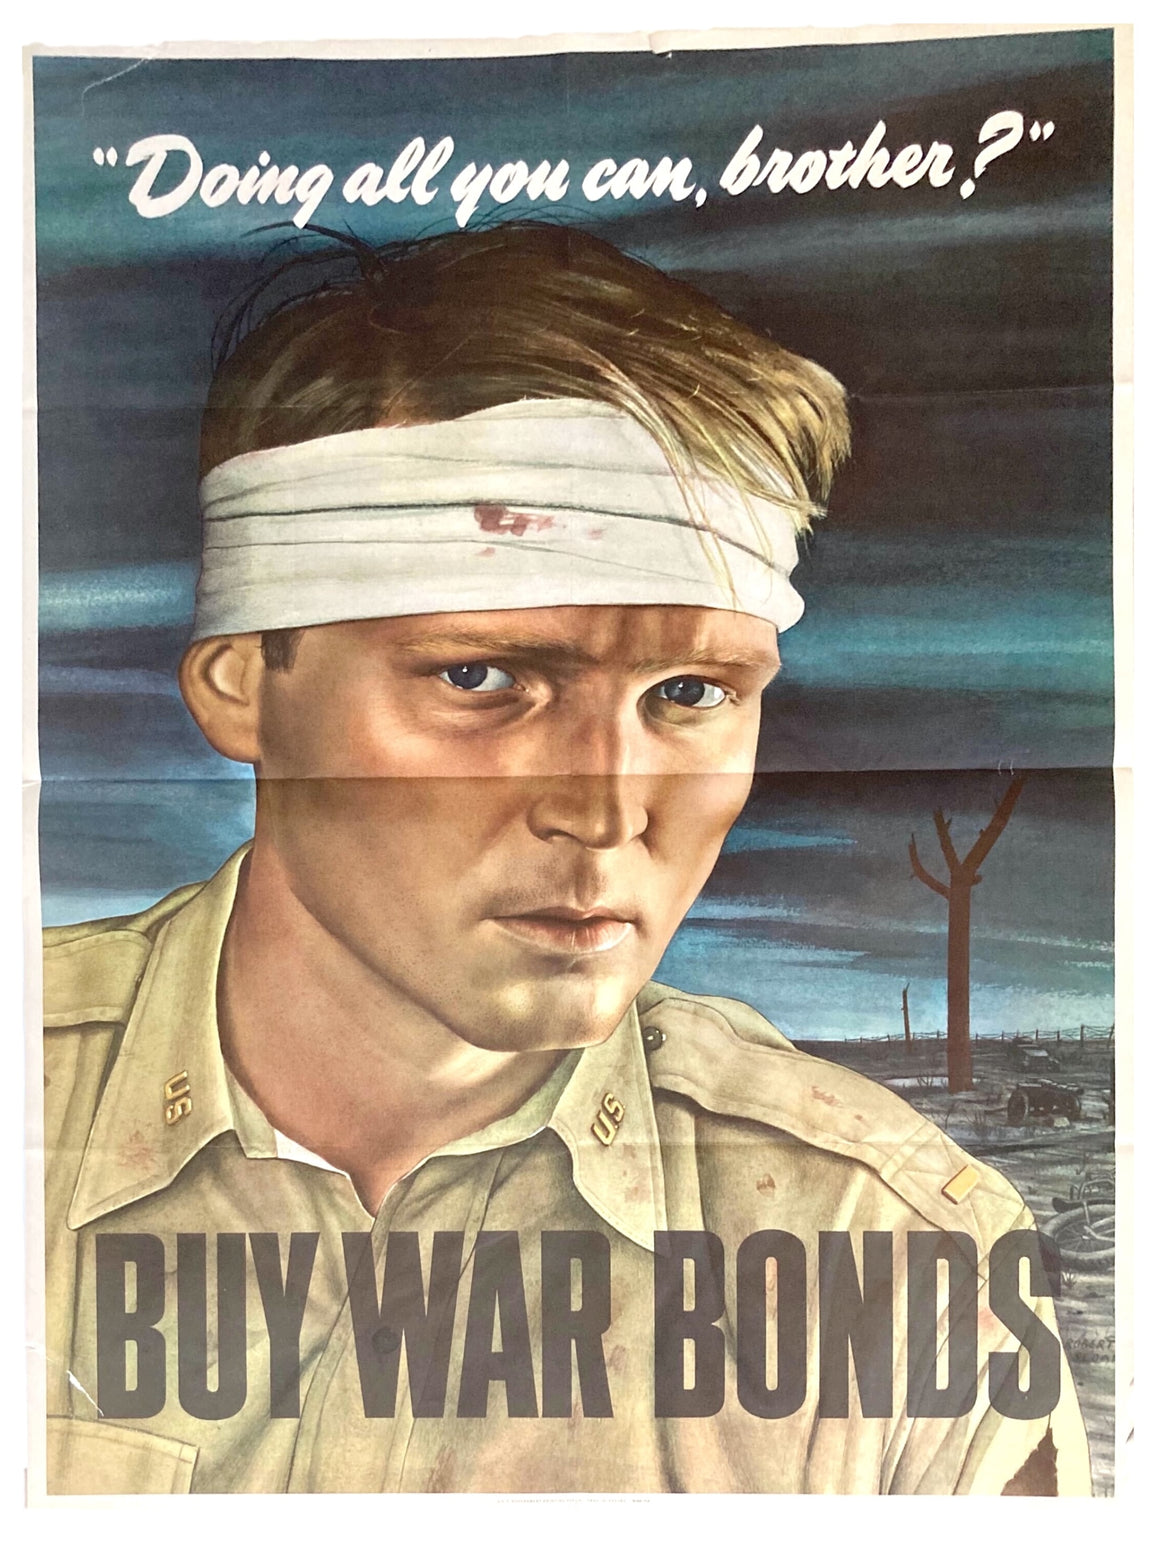 "Doing all you can, Brother? Buy War Bonds" Vintage WWII Poster, 1943